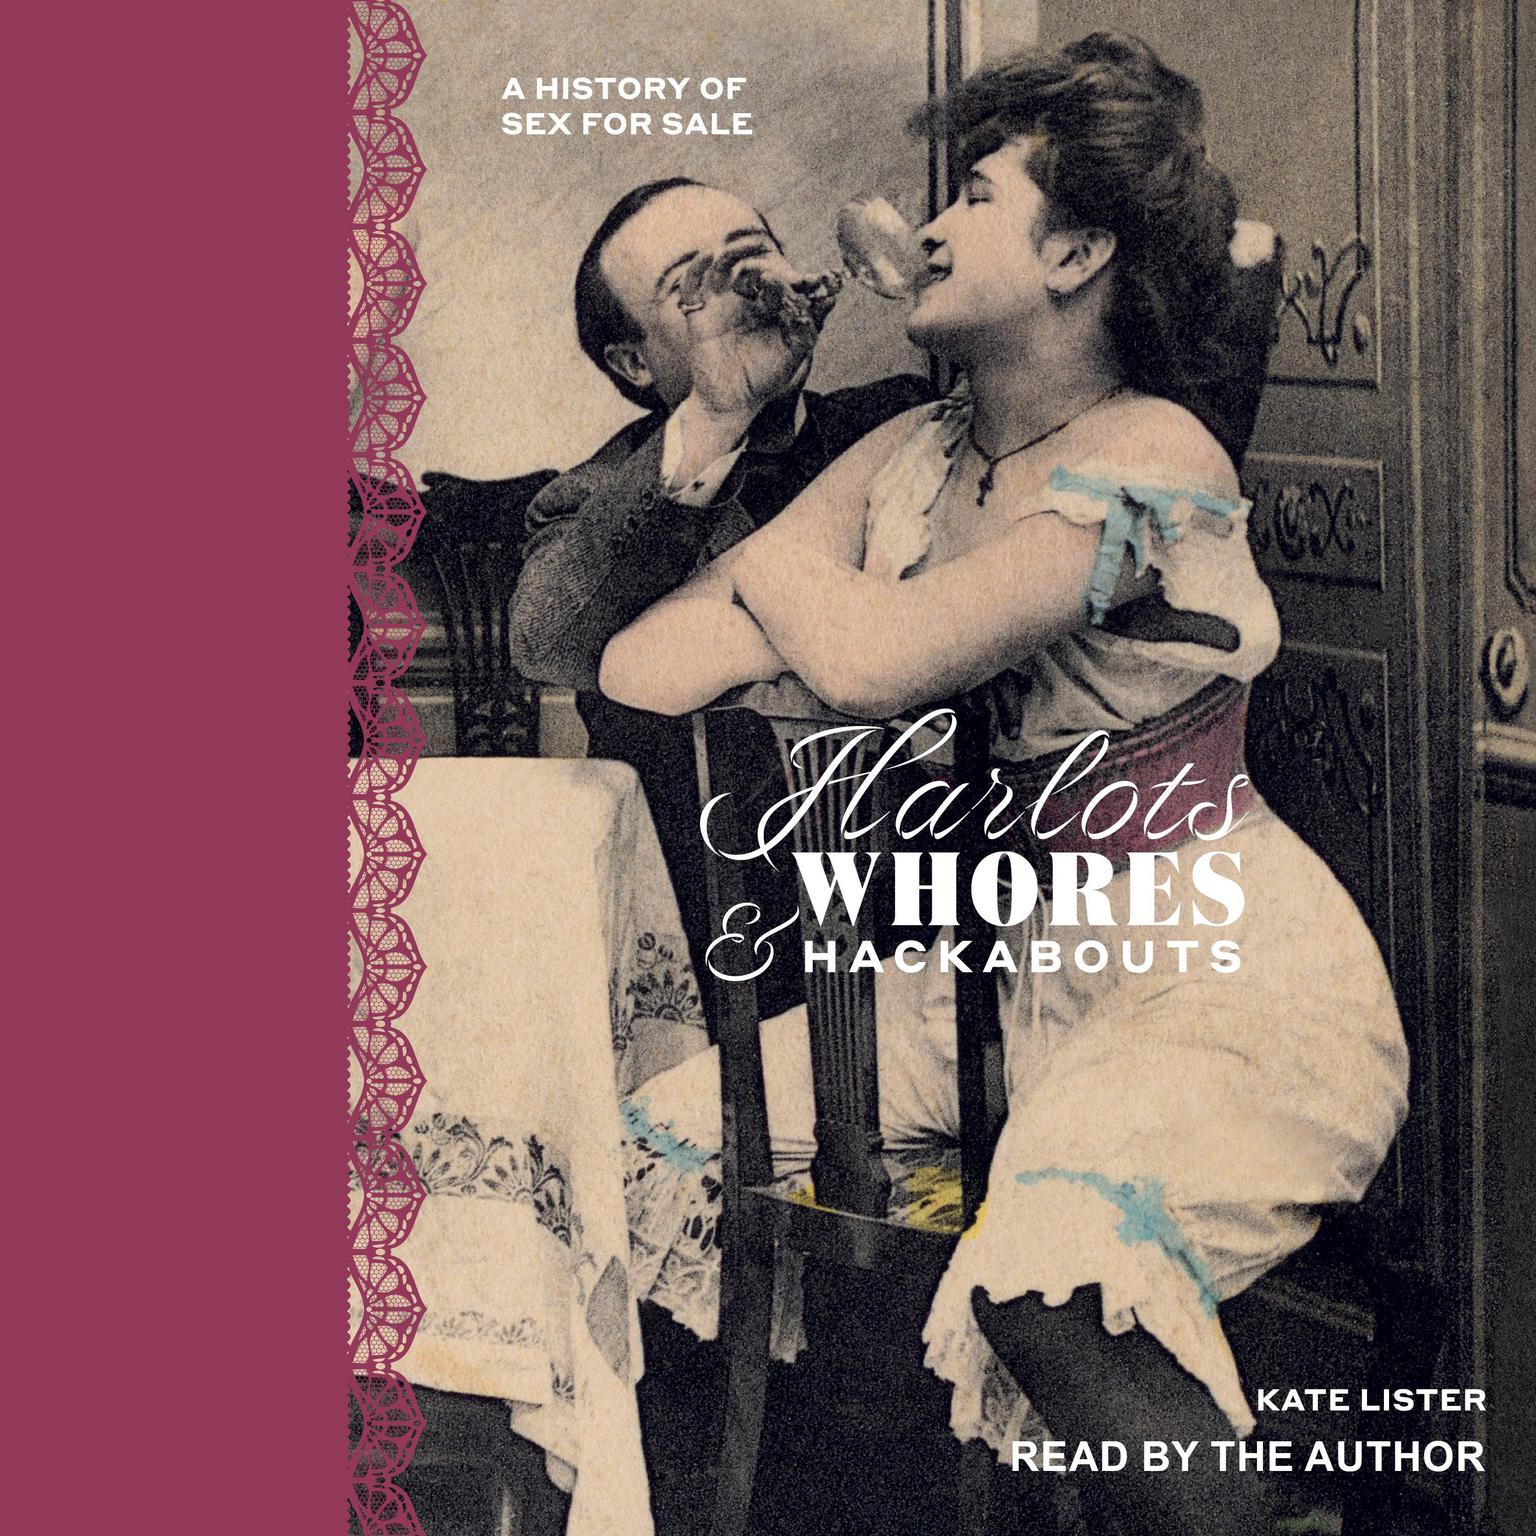 Harlots, Whores & Hackabouts: A History of Sex for Sale Audiobook, by Kate Lister